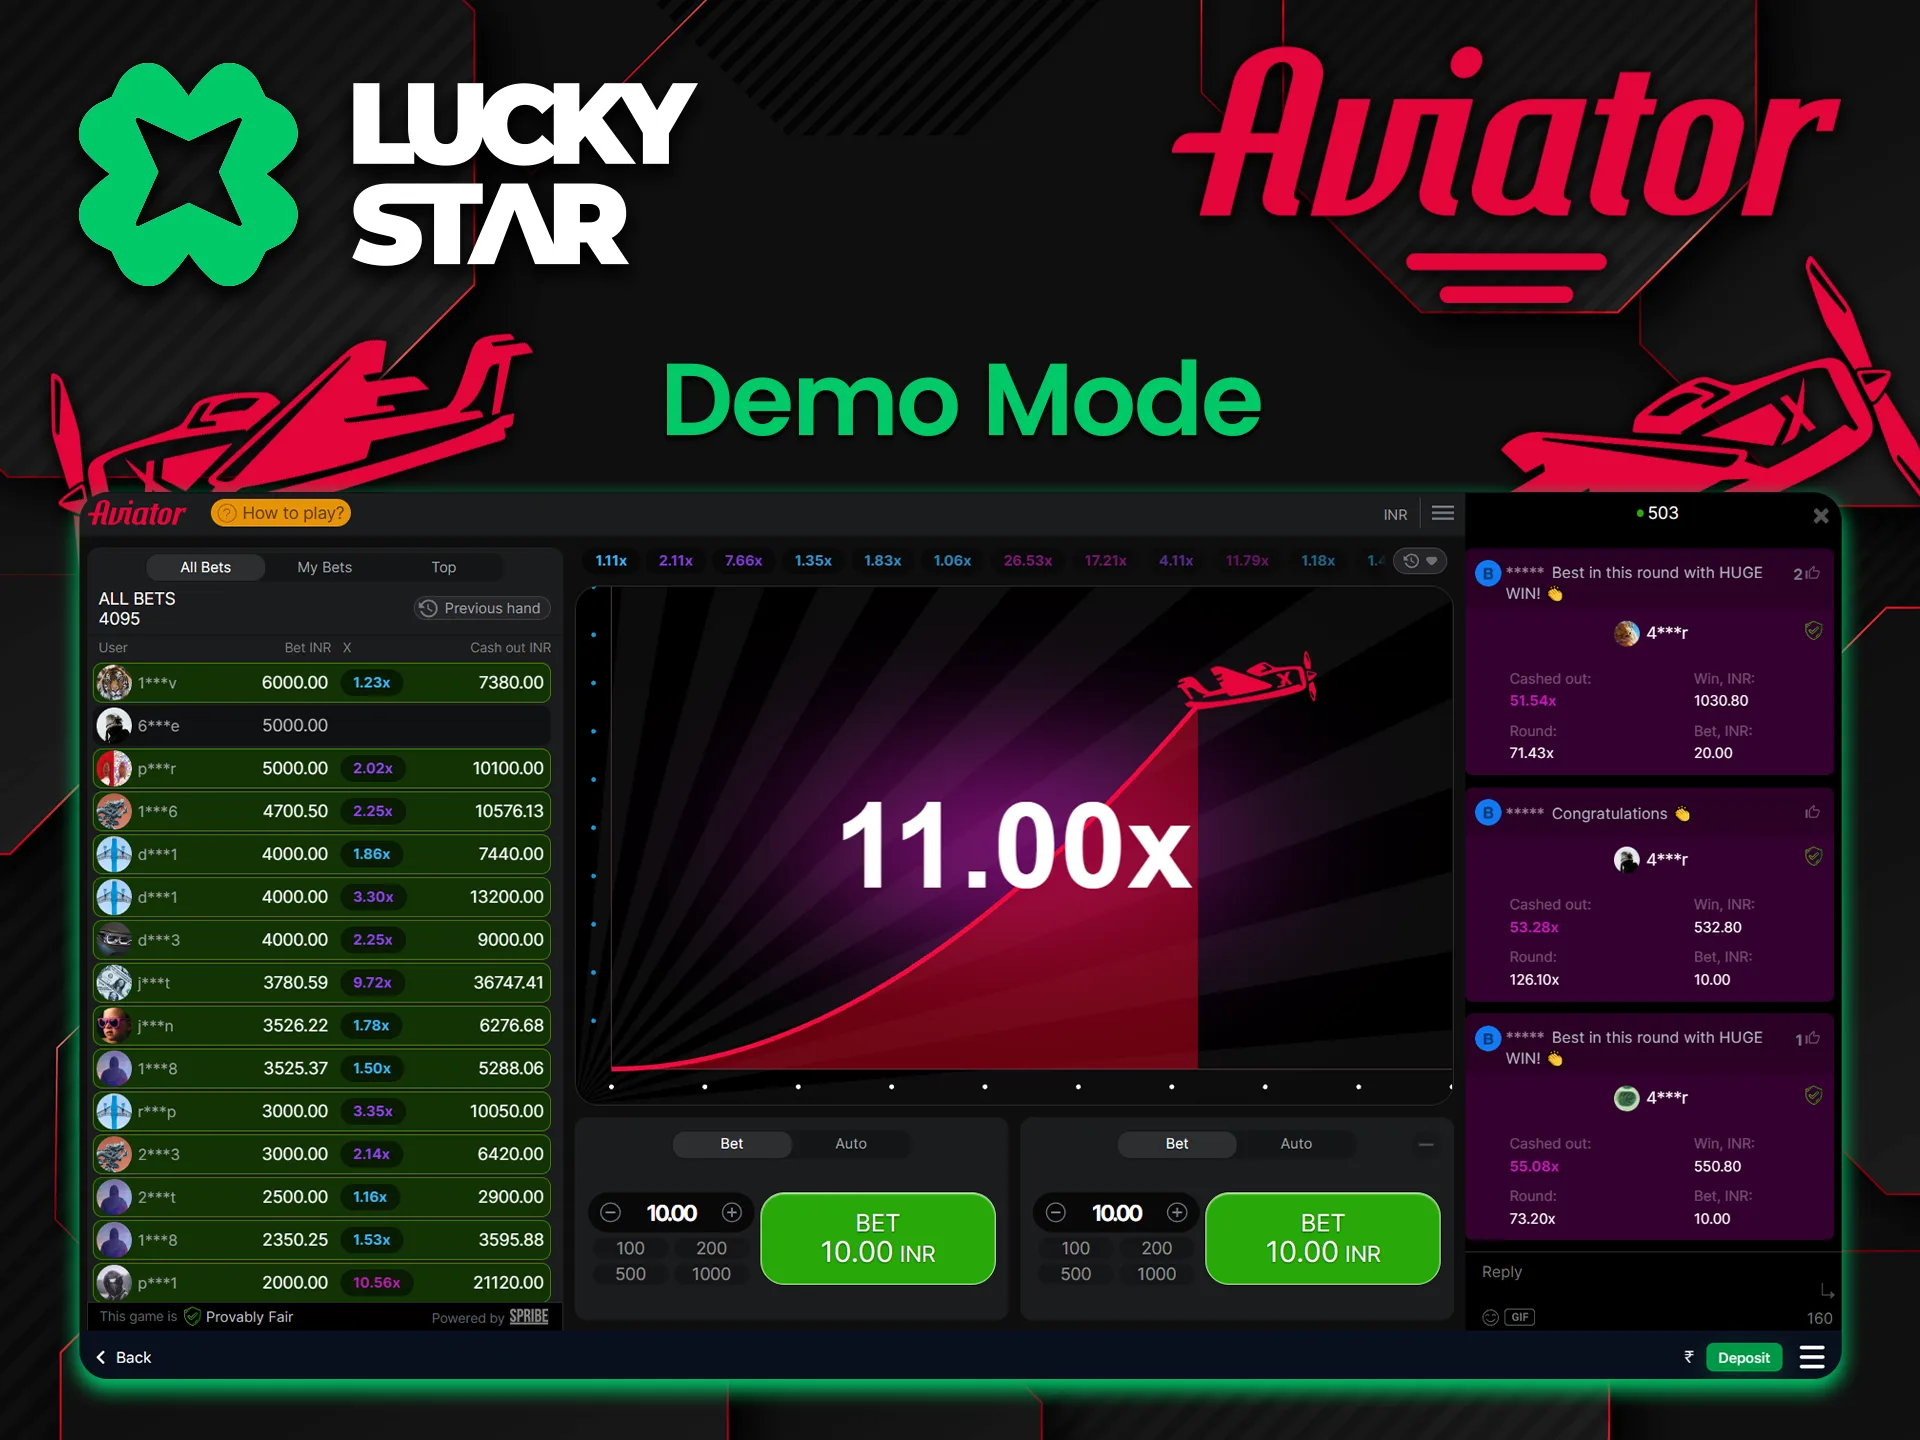 Aviator demo mode is available on the Lucky Star platform.